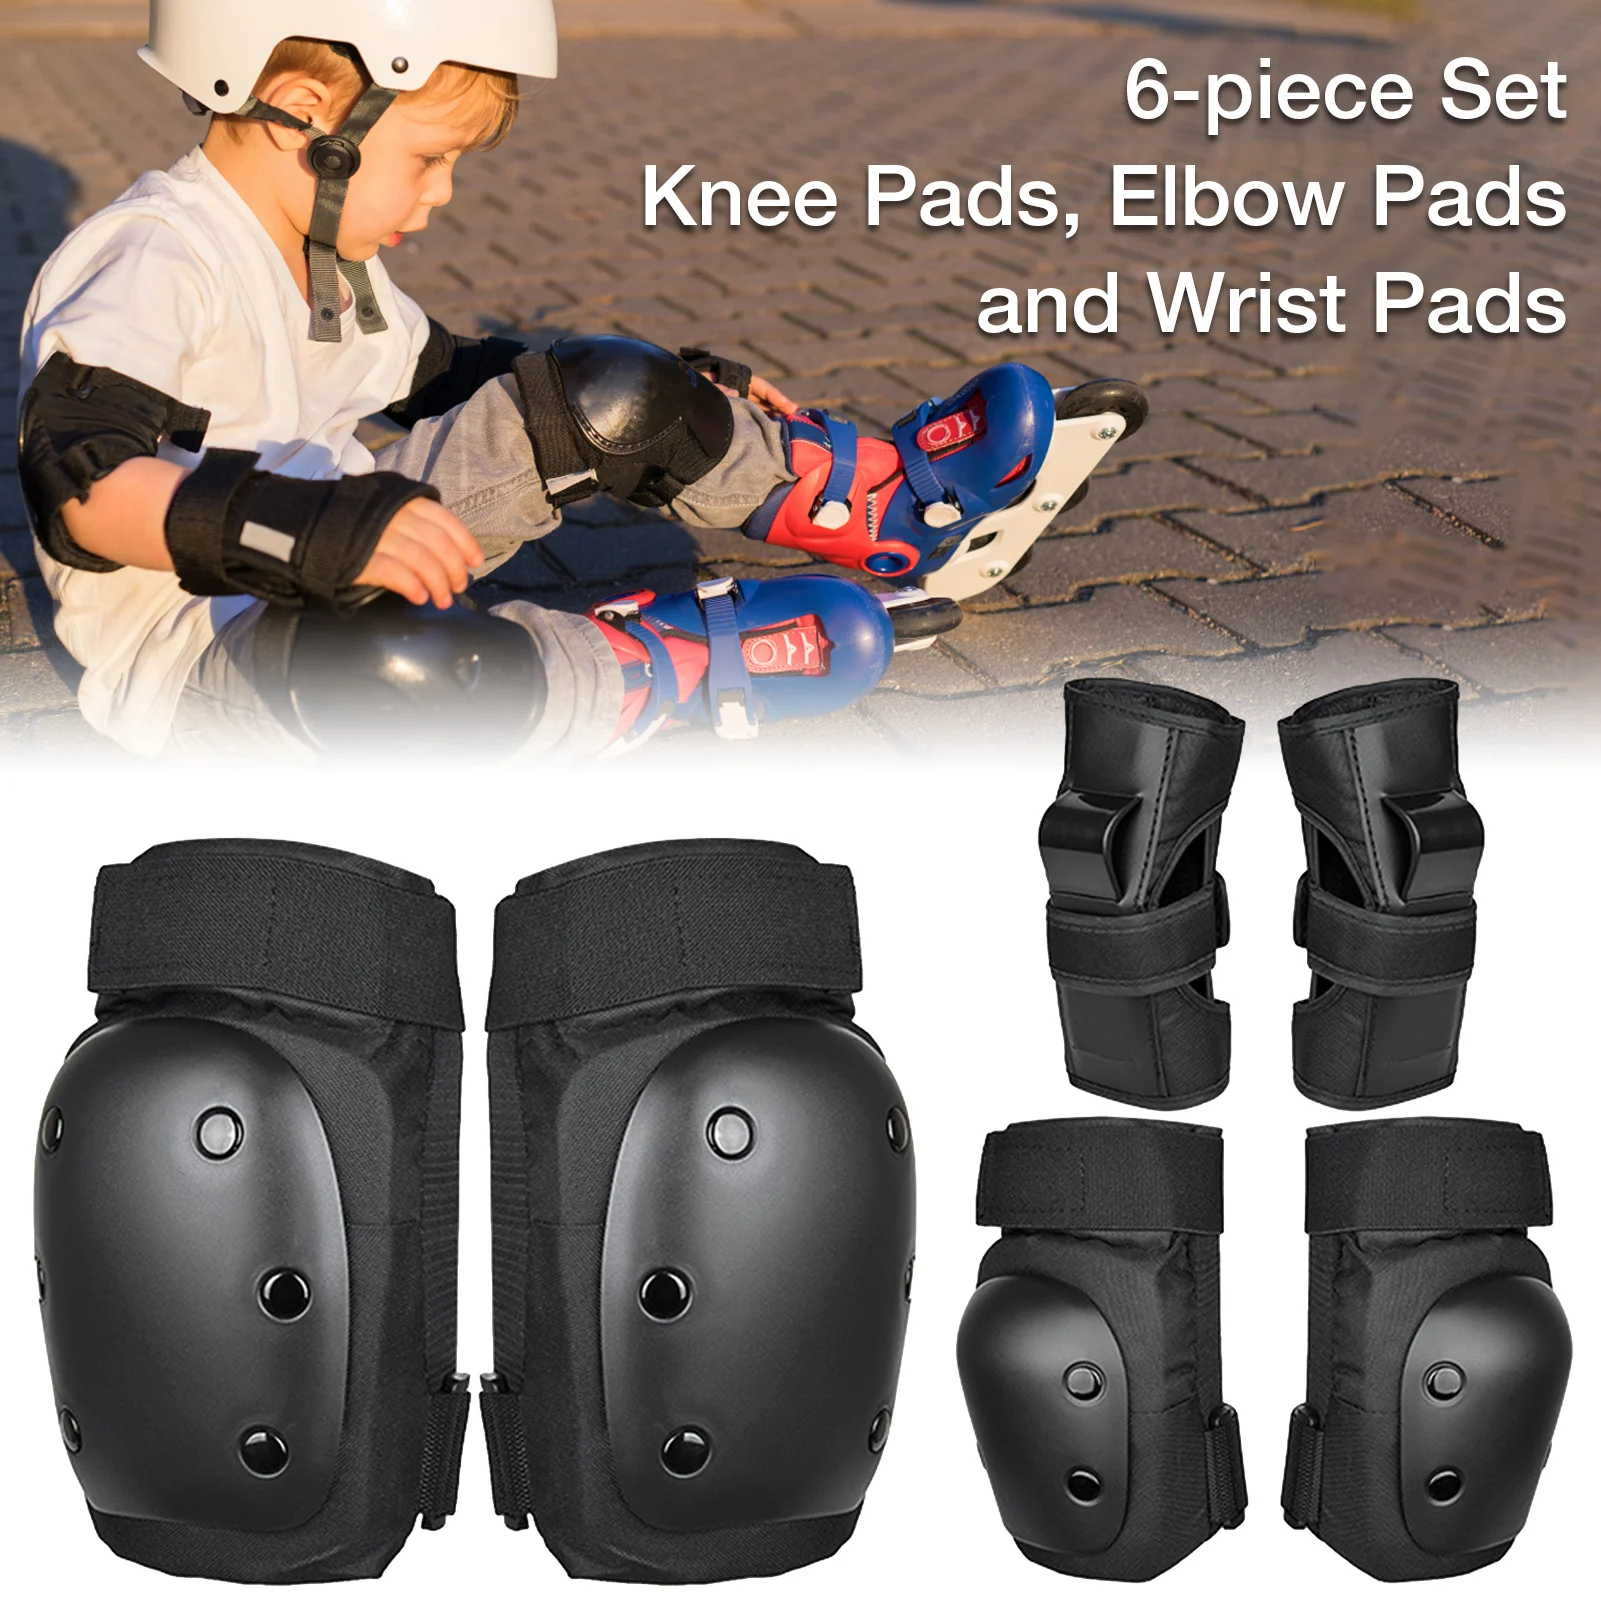 6PCS Kid Roller Ski/Cycling Protective Gear Pad KNEE/ELBOW/WRIST Safety Guard US 